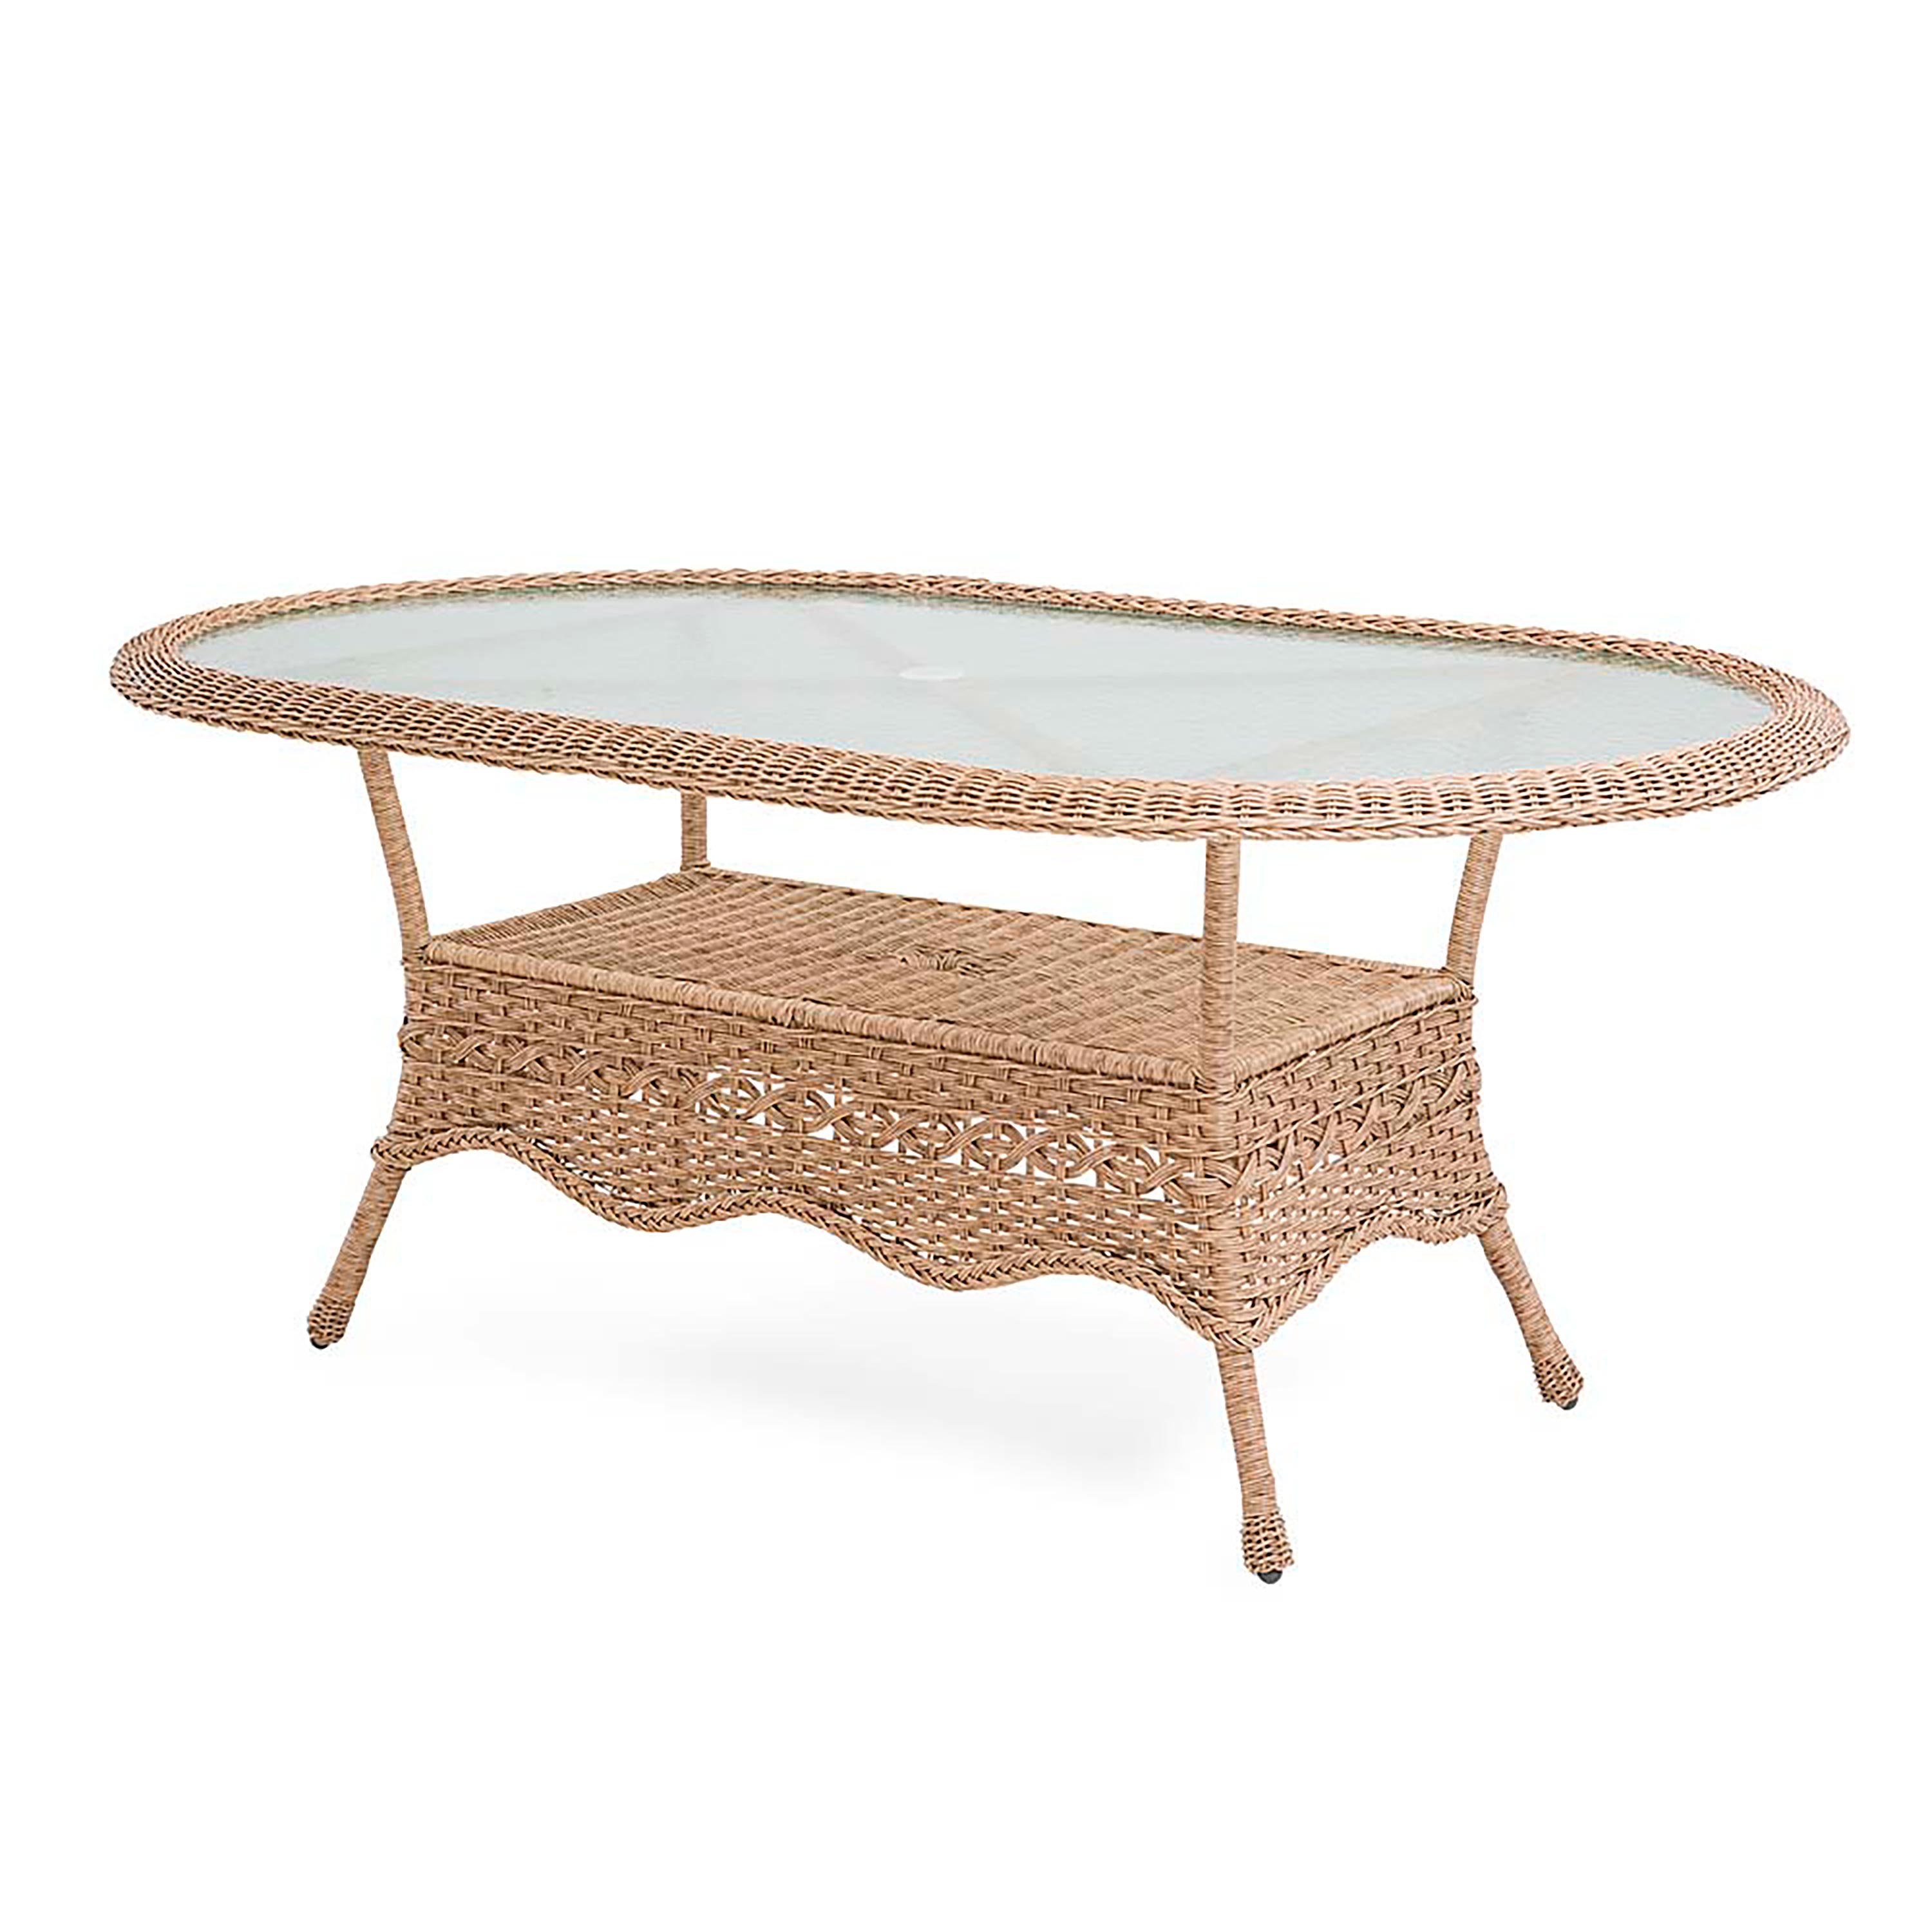 Prospect Hill Oval Dining Table